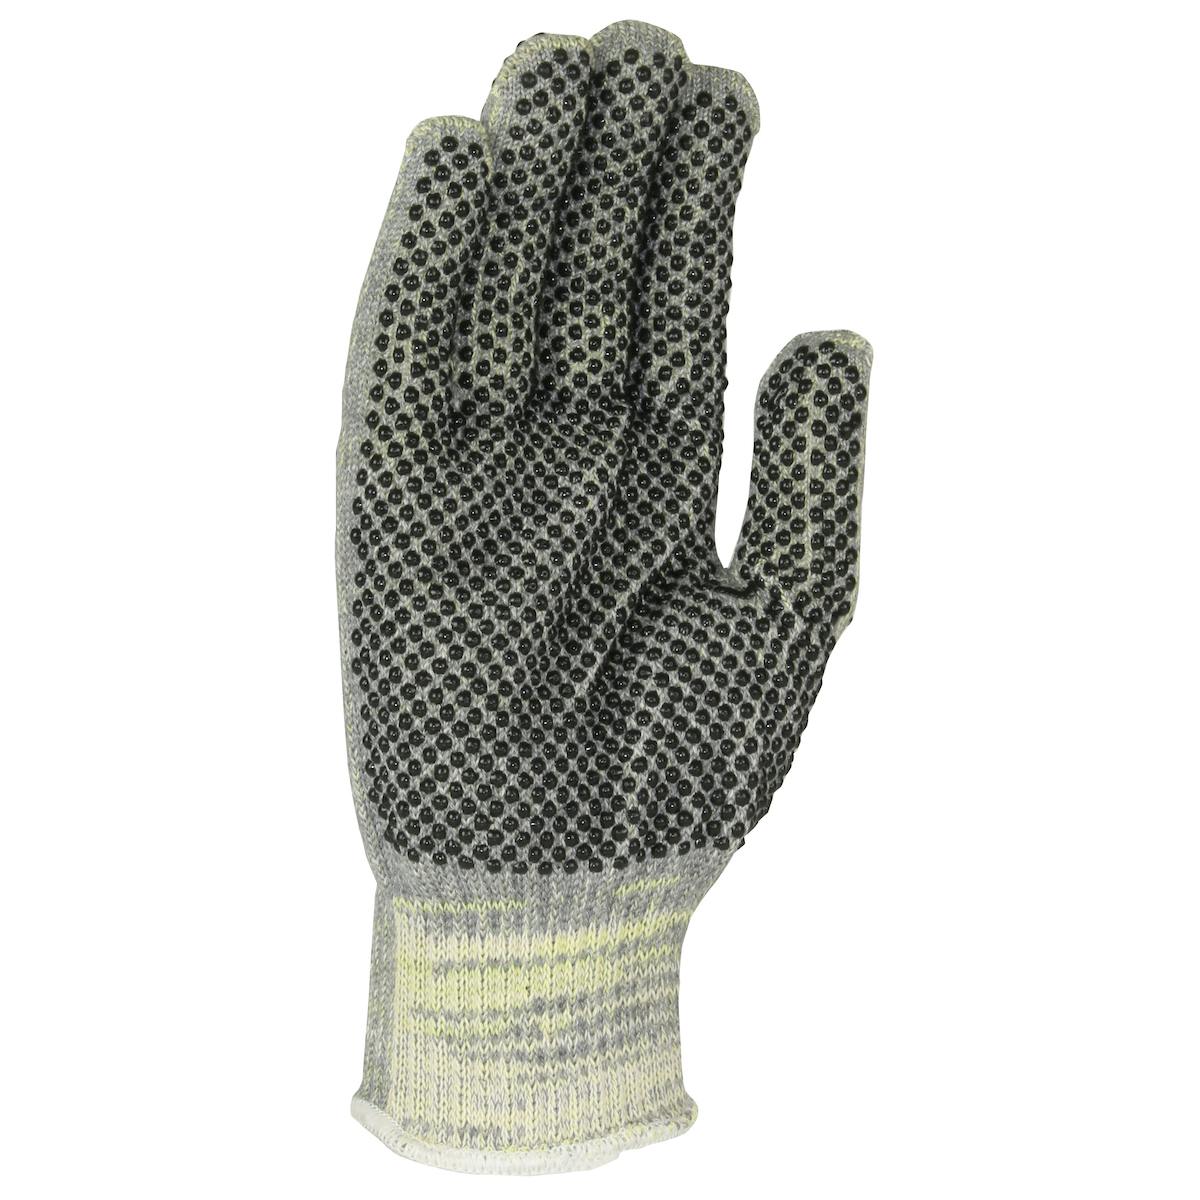 Kut Gard® Seamless Knit ATA® Blended Glove with Double-Sided PVC Dot Grip (MATA10-GY-PD2)